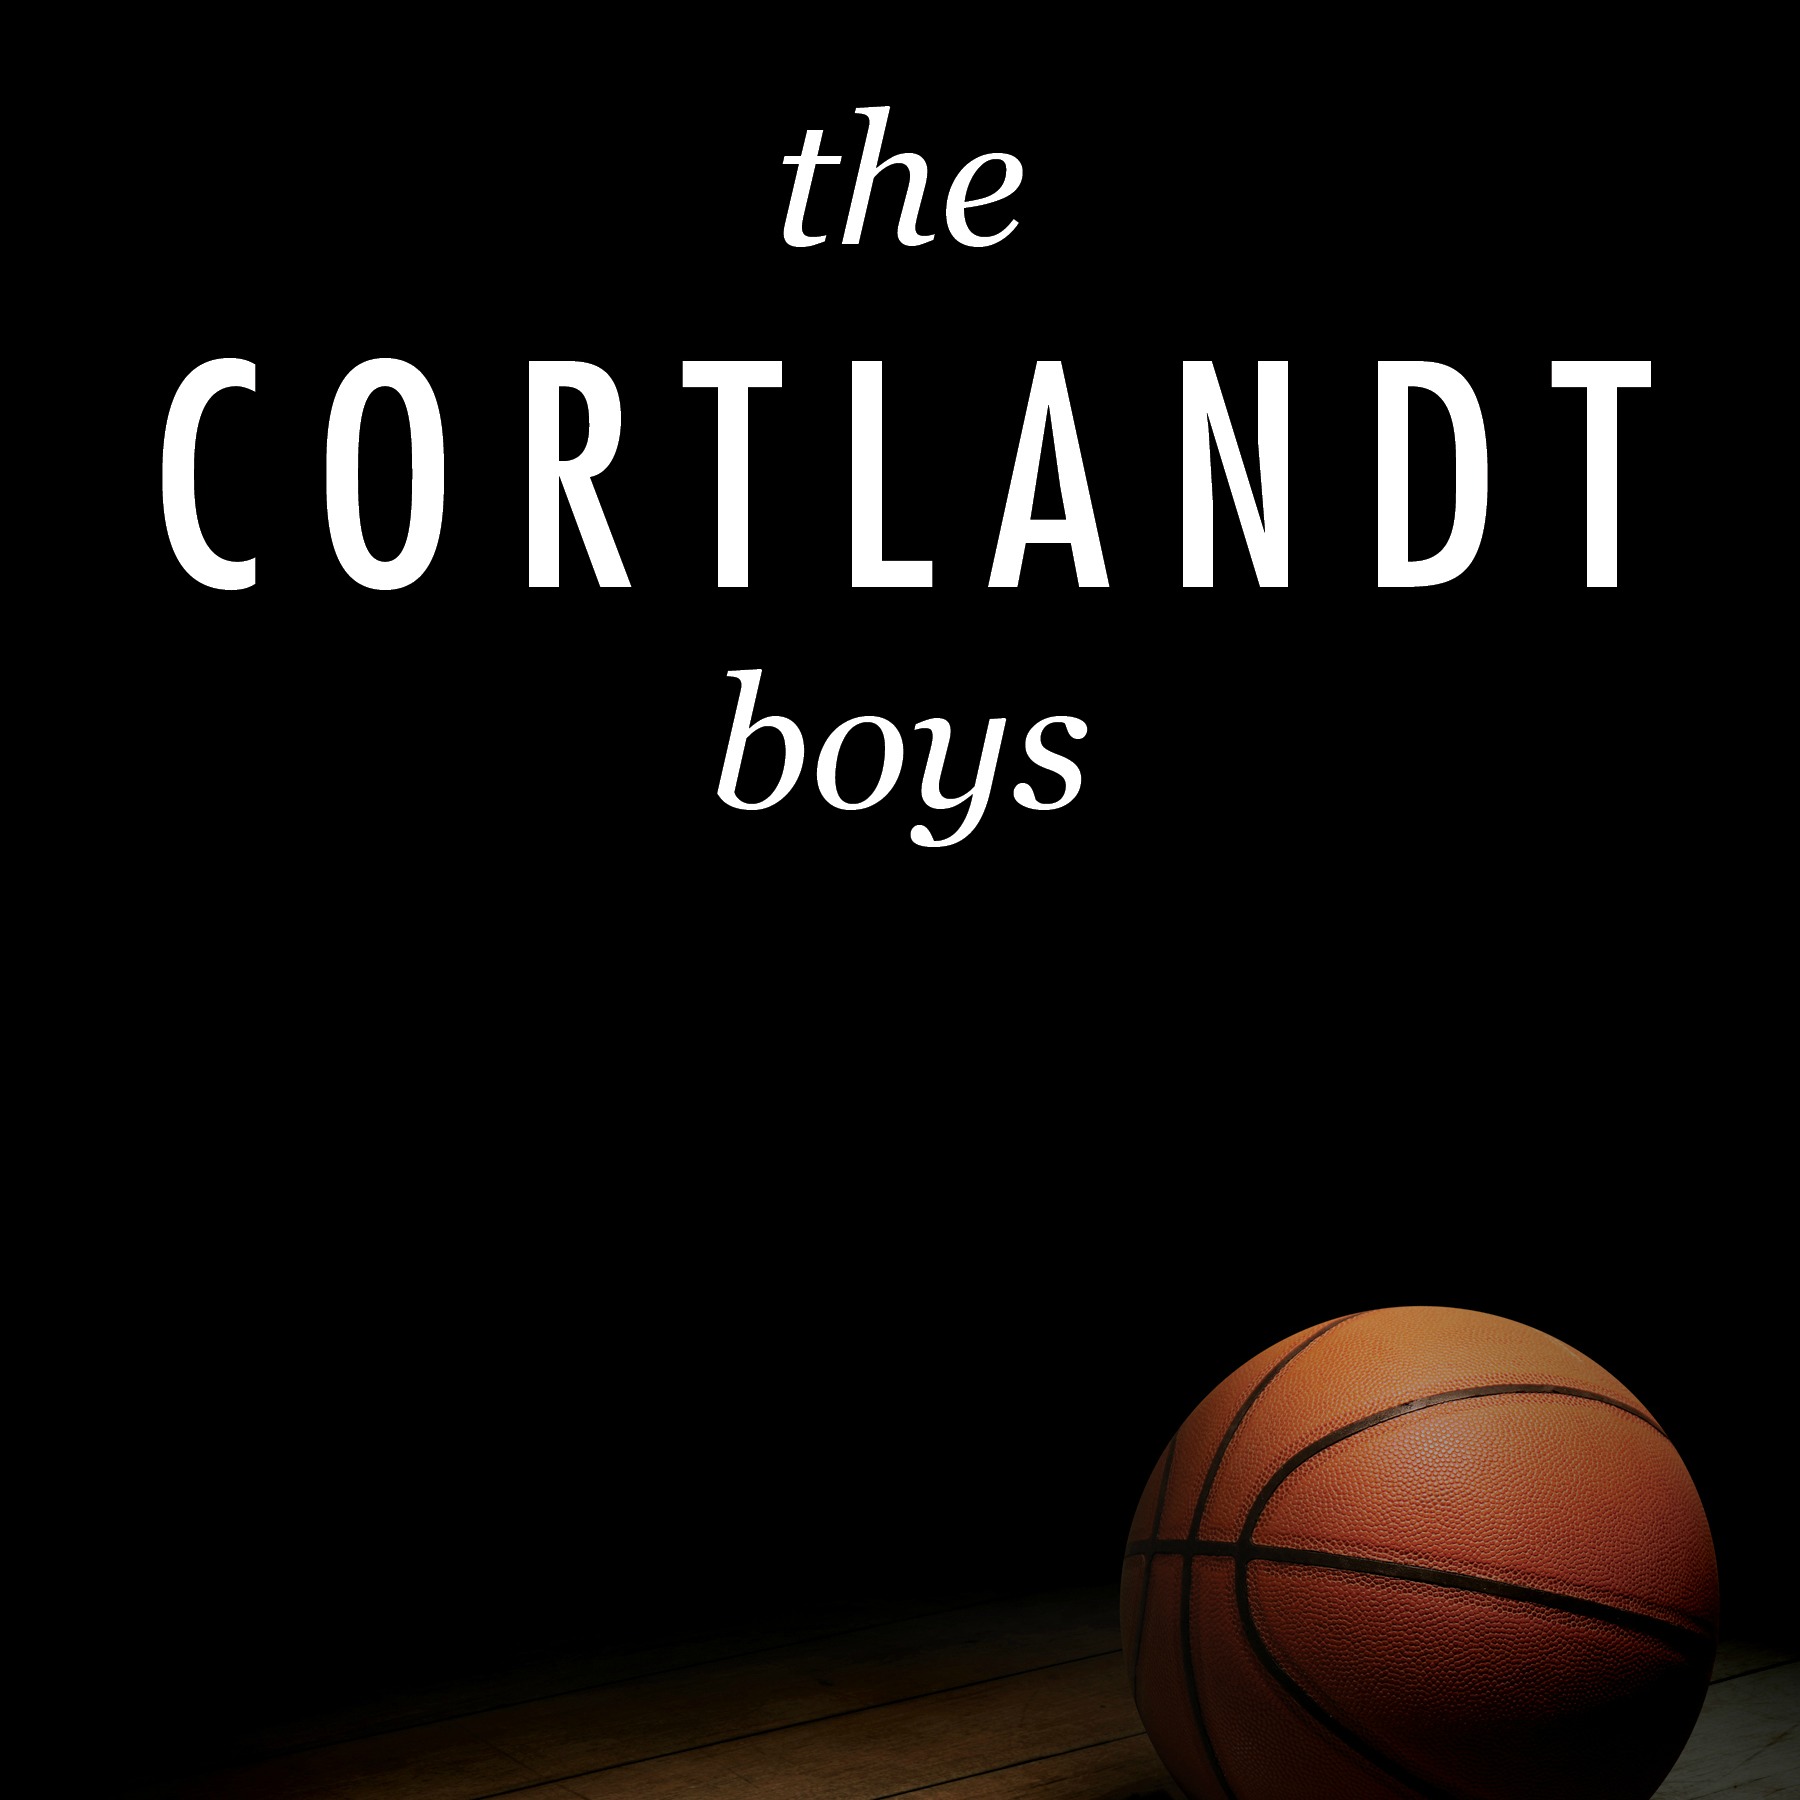 Not Sure Which Book to Read Next? Check Out The Cortlandt Boys!